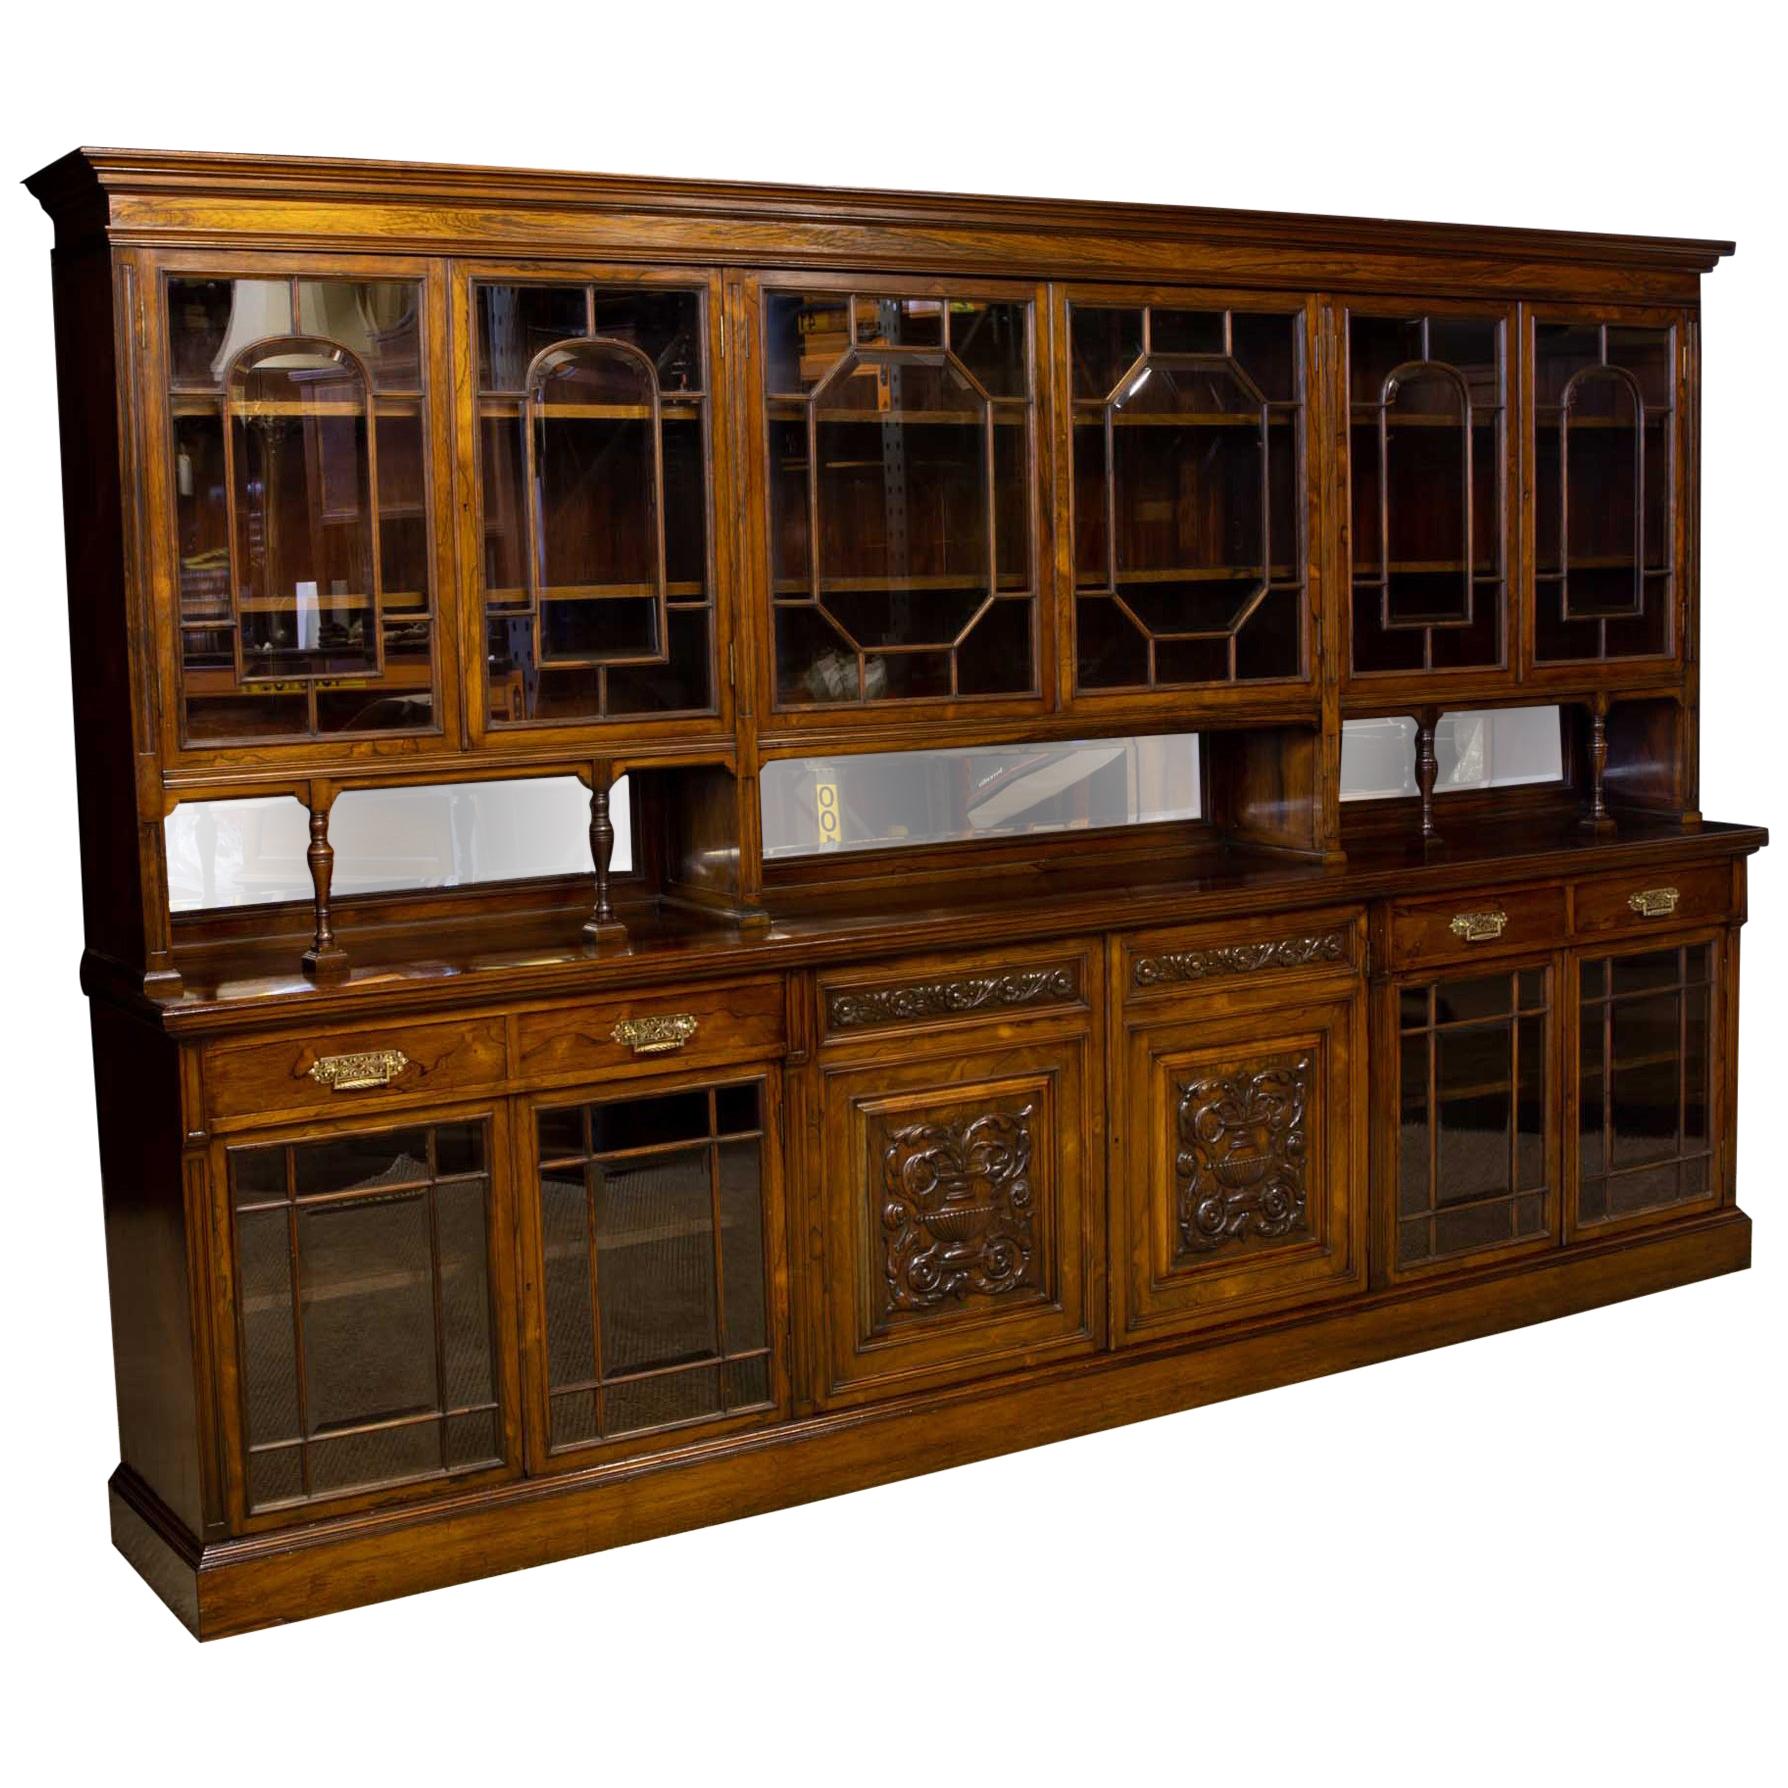 Edwardian Rosewood Bookcase from Harrods Manchester